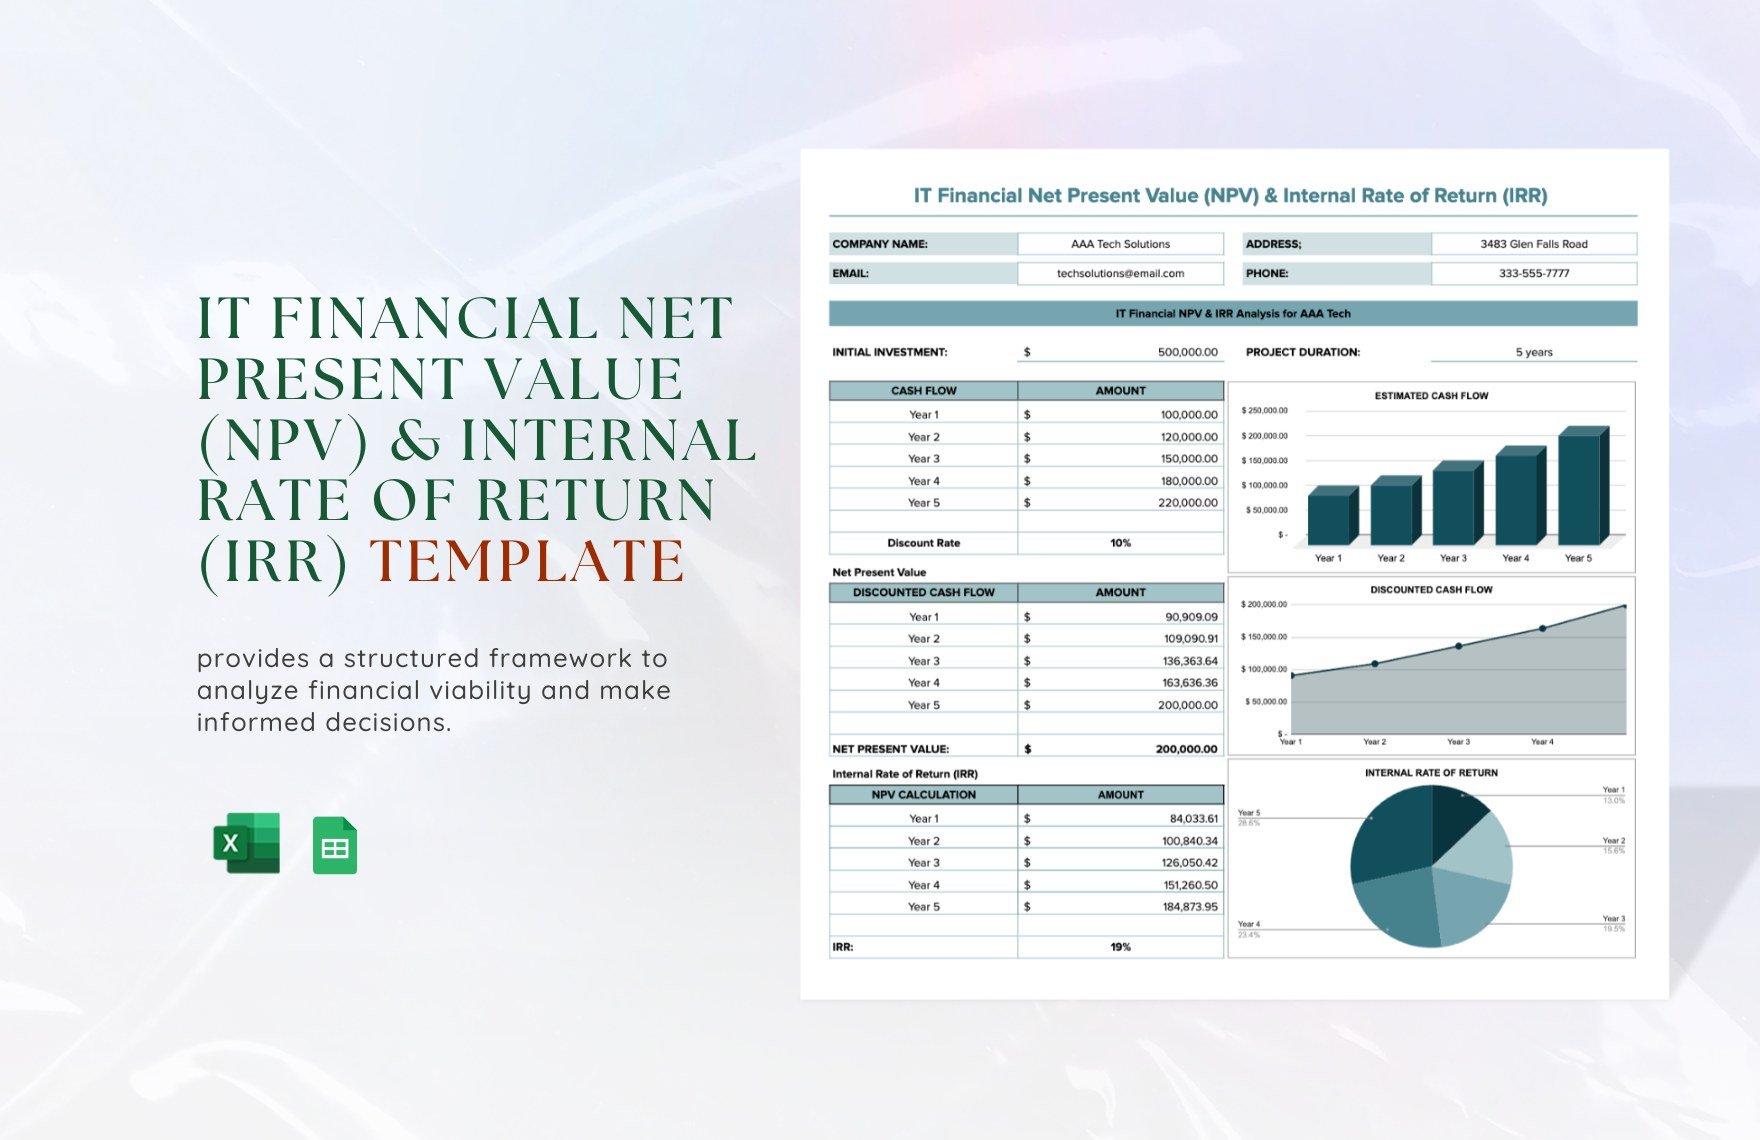 IT Financial Net Present Value (NPV) & Internal Rate of Return (IRR) Template in Excel, Google Sheets